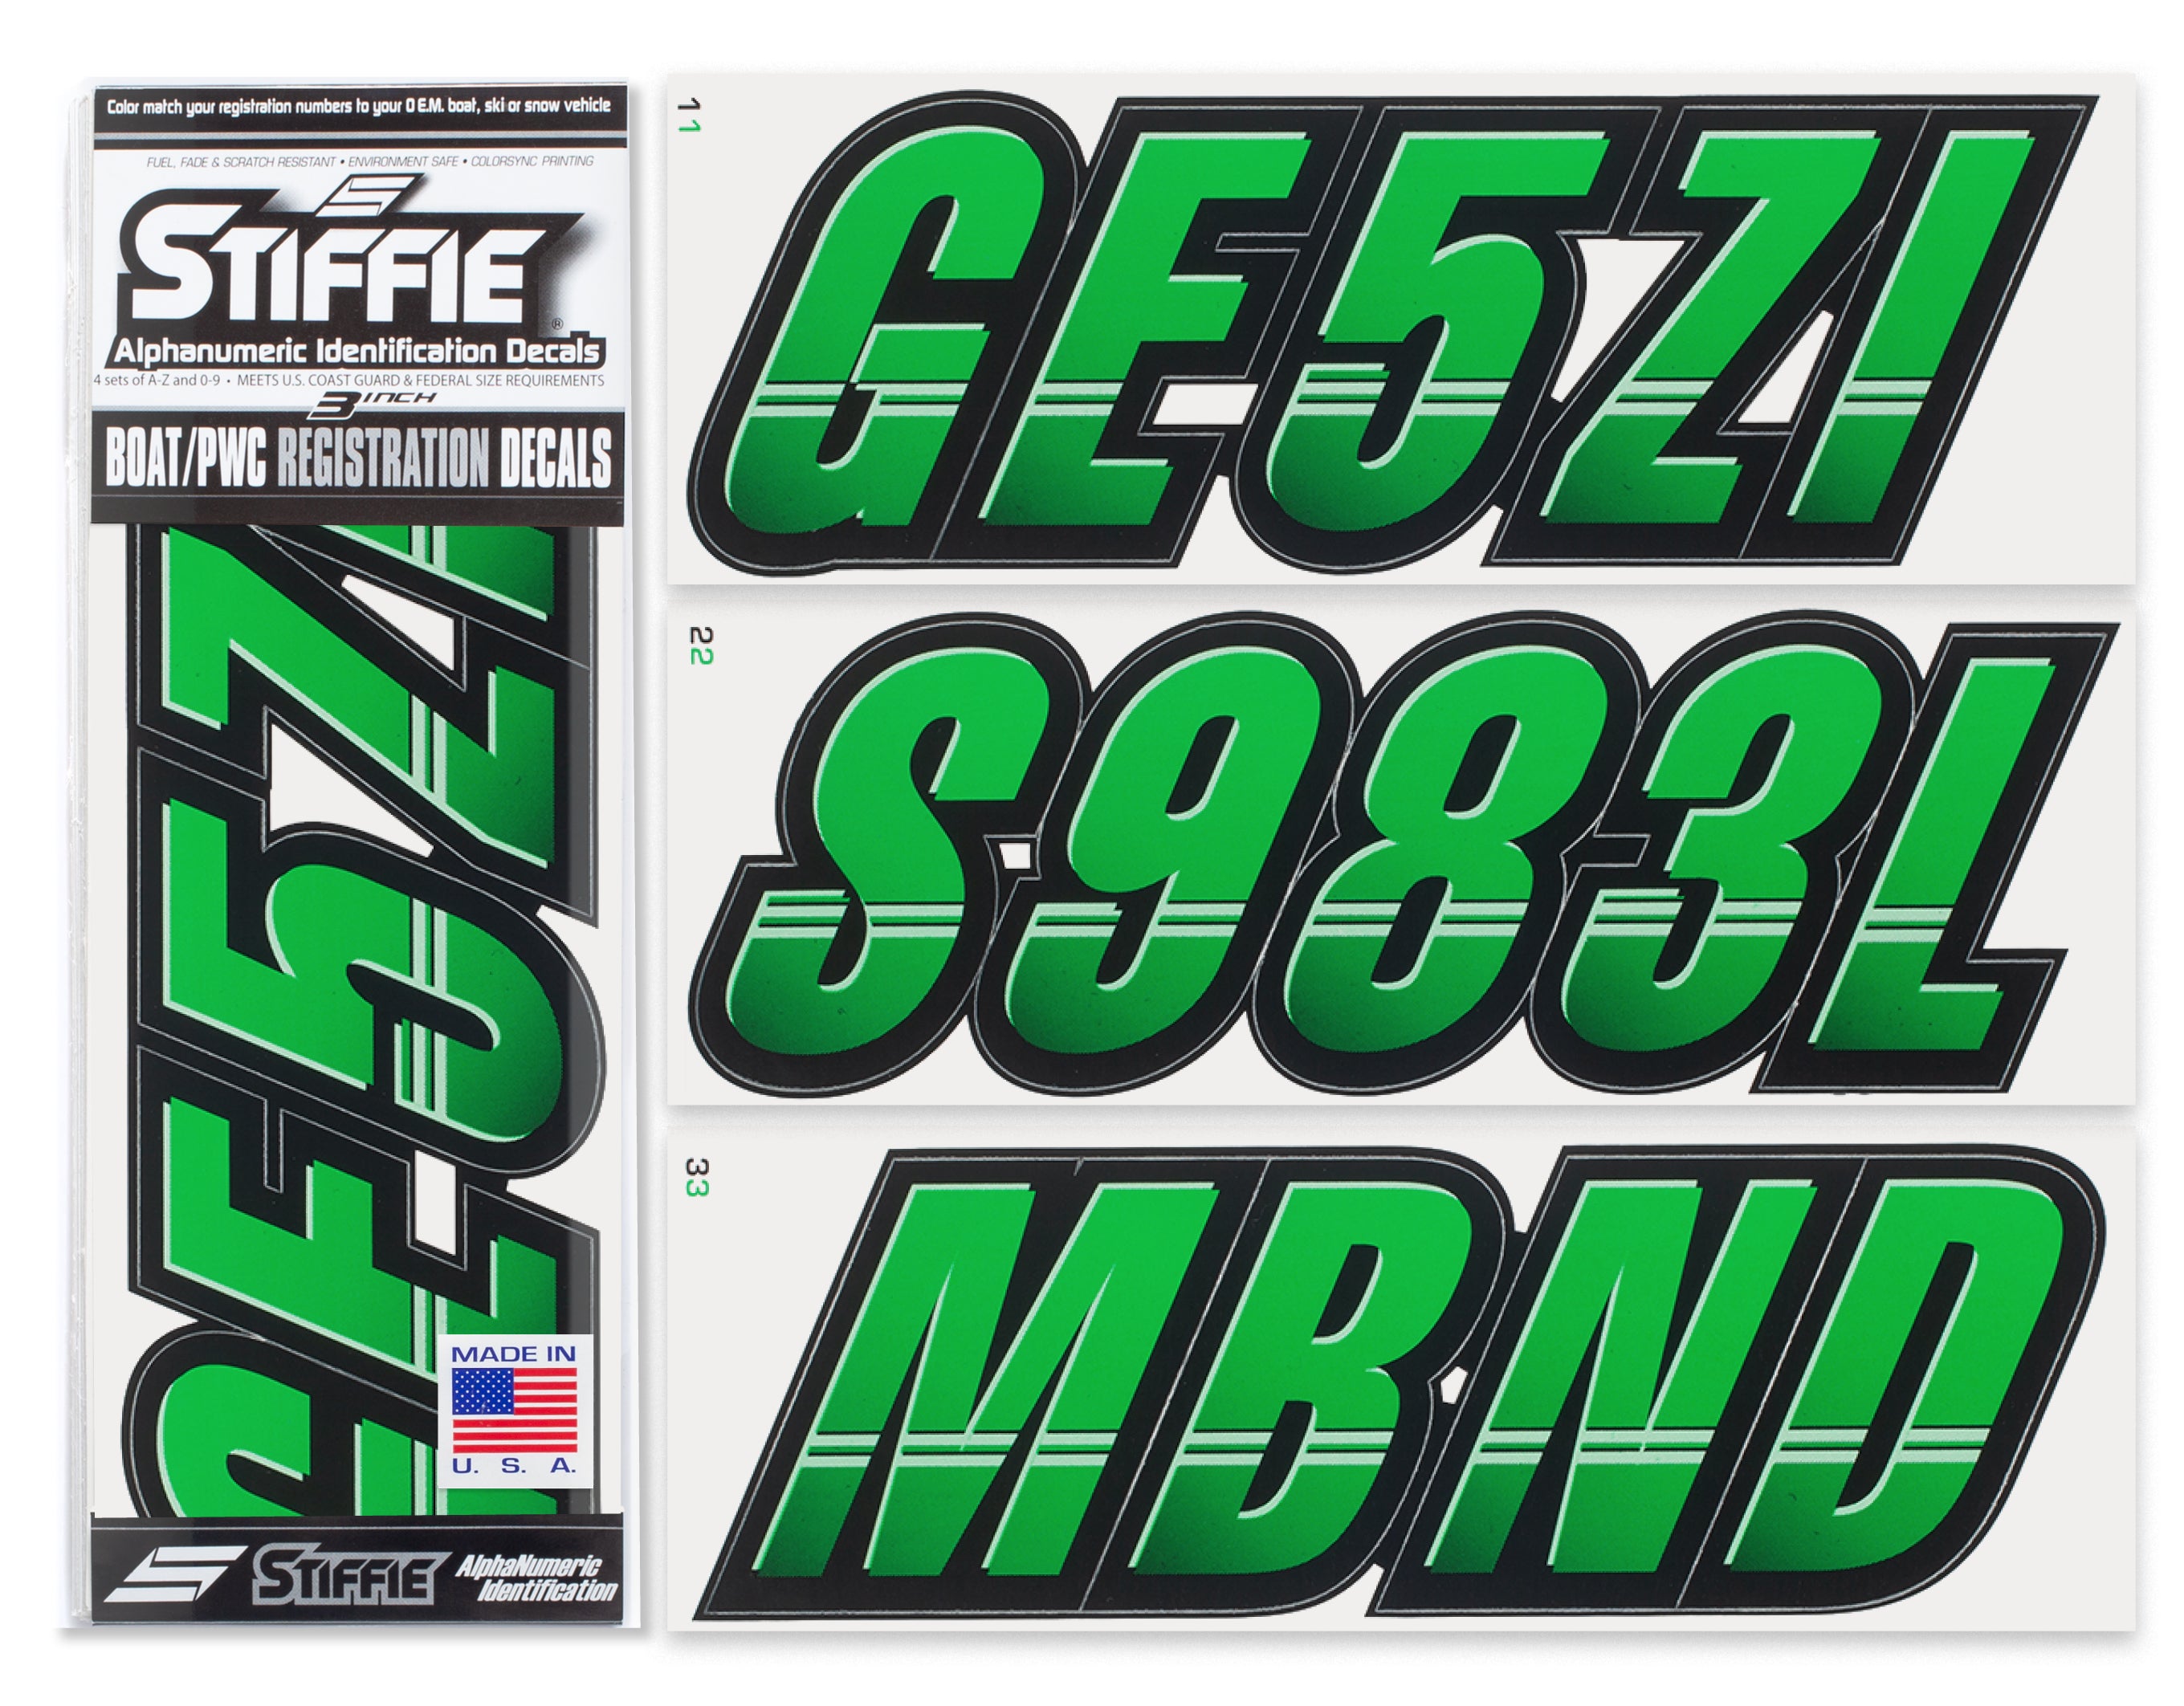 Techtron Green/Black 3" Alpha-Numeric Registration Identification Numbers Stickers Decals for Boats & Personal Watercraft